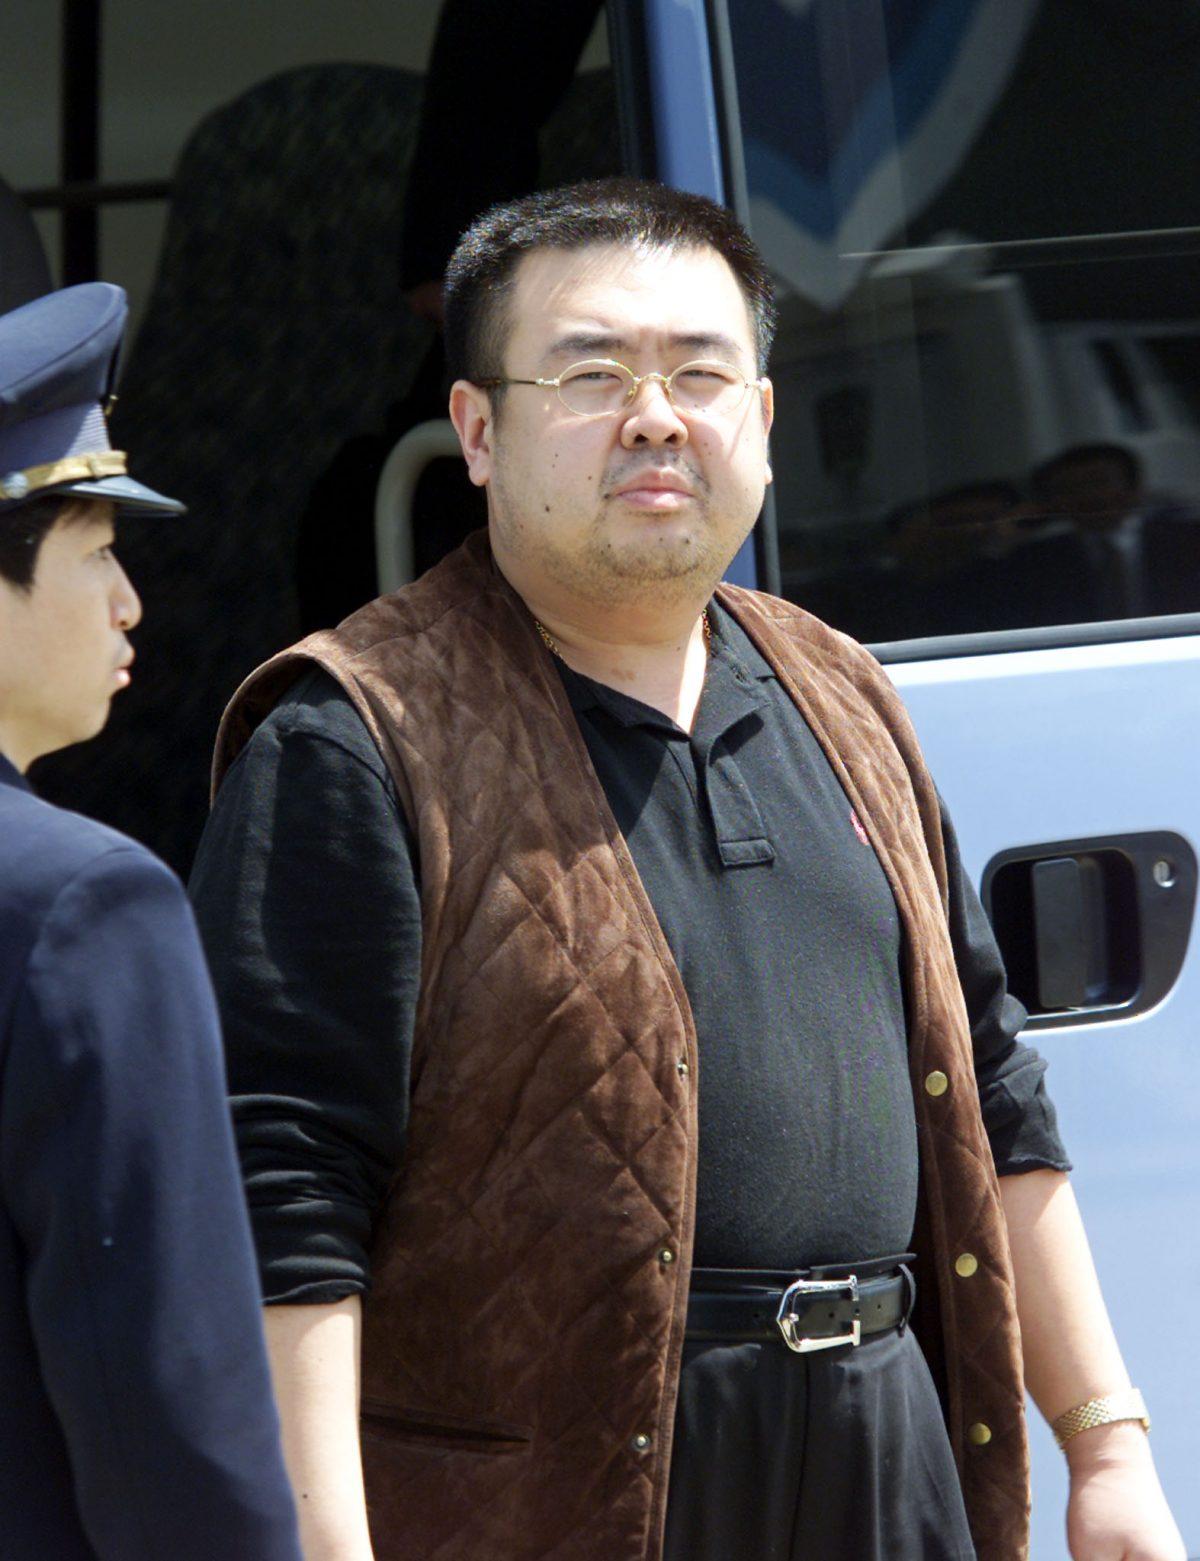 Escorted by an immigration officer, a man believed to be Kim Jong-Nam, son of North Korean leader Kim Jong-Il, gets off a bus to board an ANA905 (All Nippon Airways) airplane at Narita airport near Tokyo, on May 4, 2001. (Toshifumi Kitamura/AFP/Getty Images)